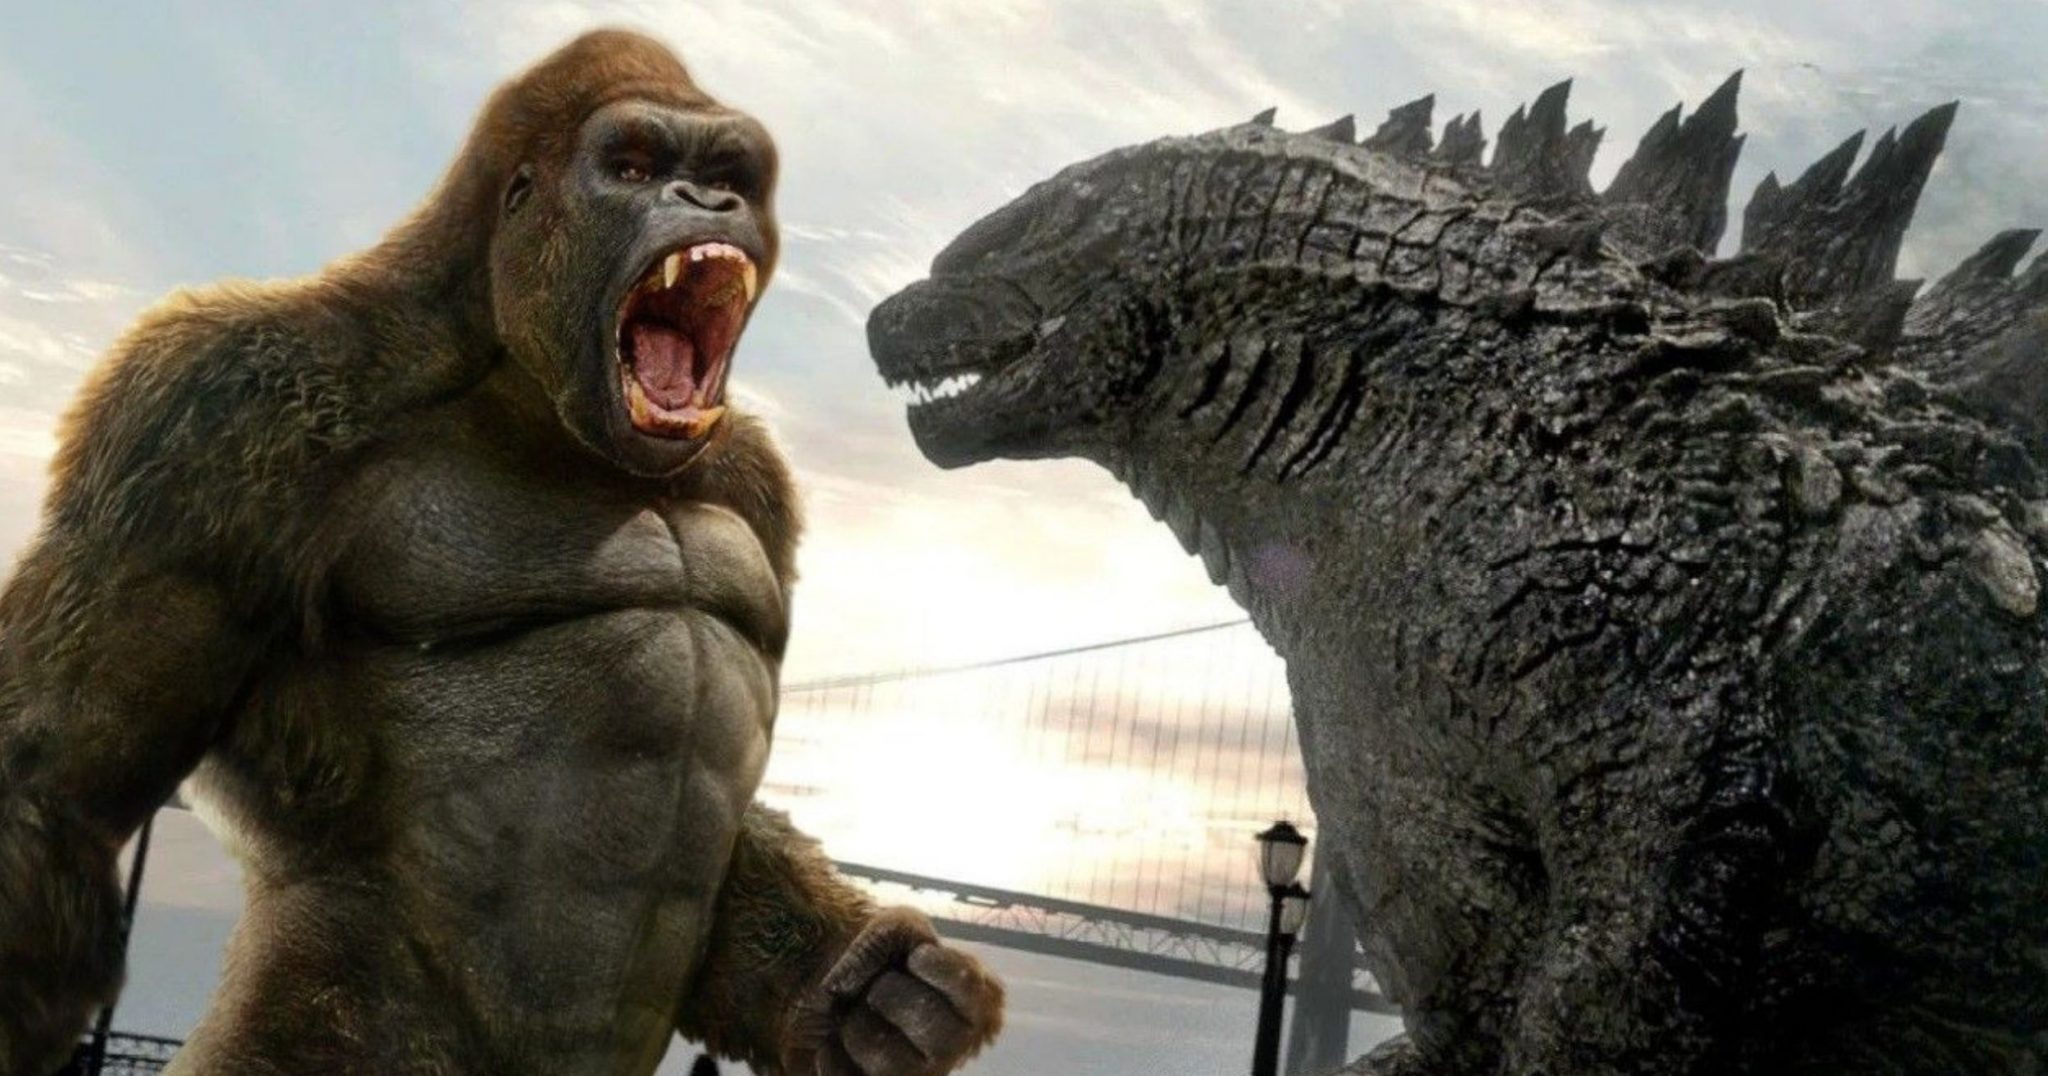 Godzilla vs Kong will be released earlier this year